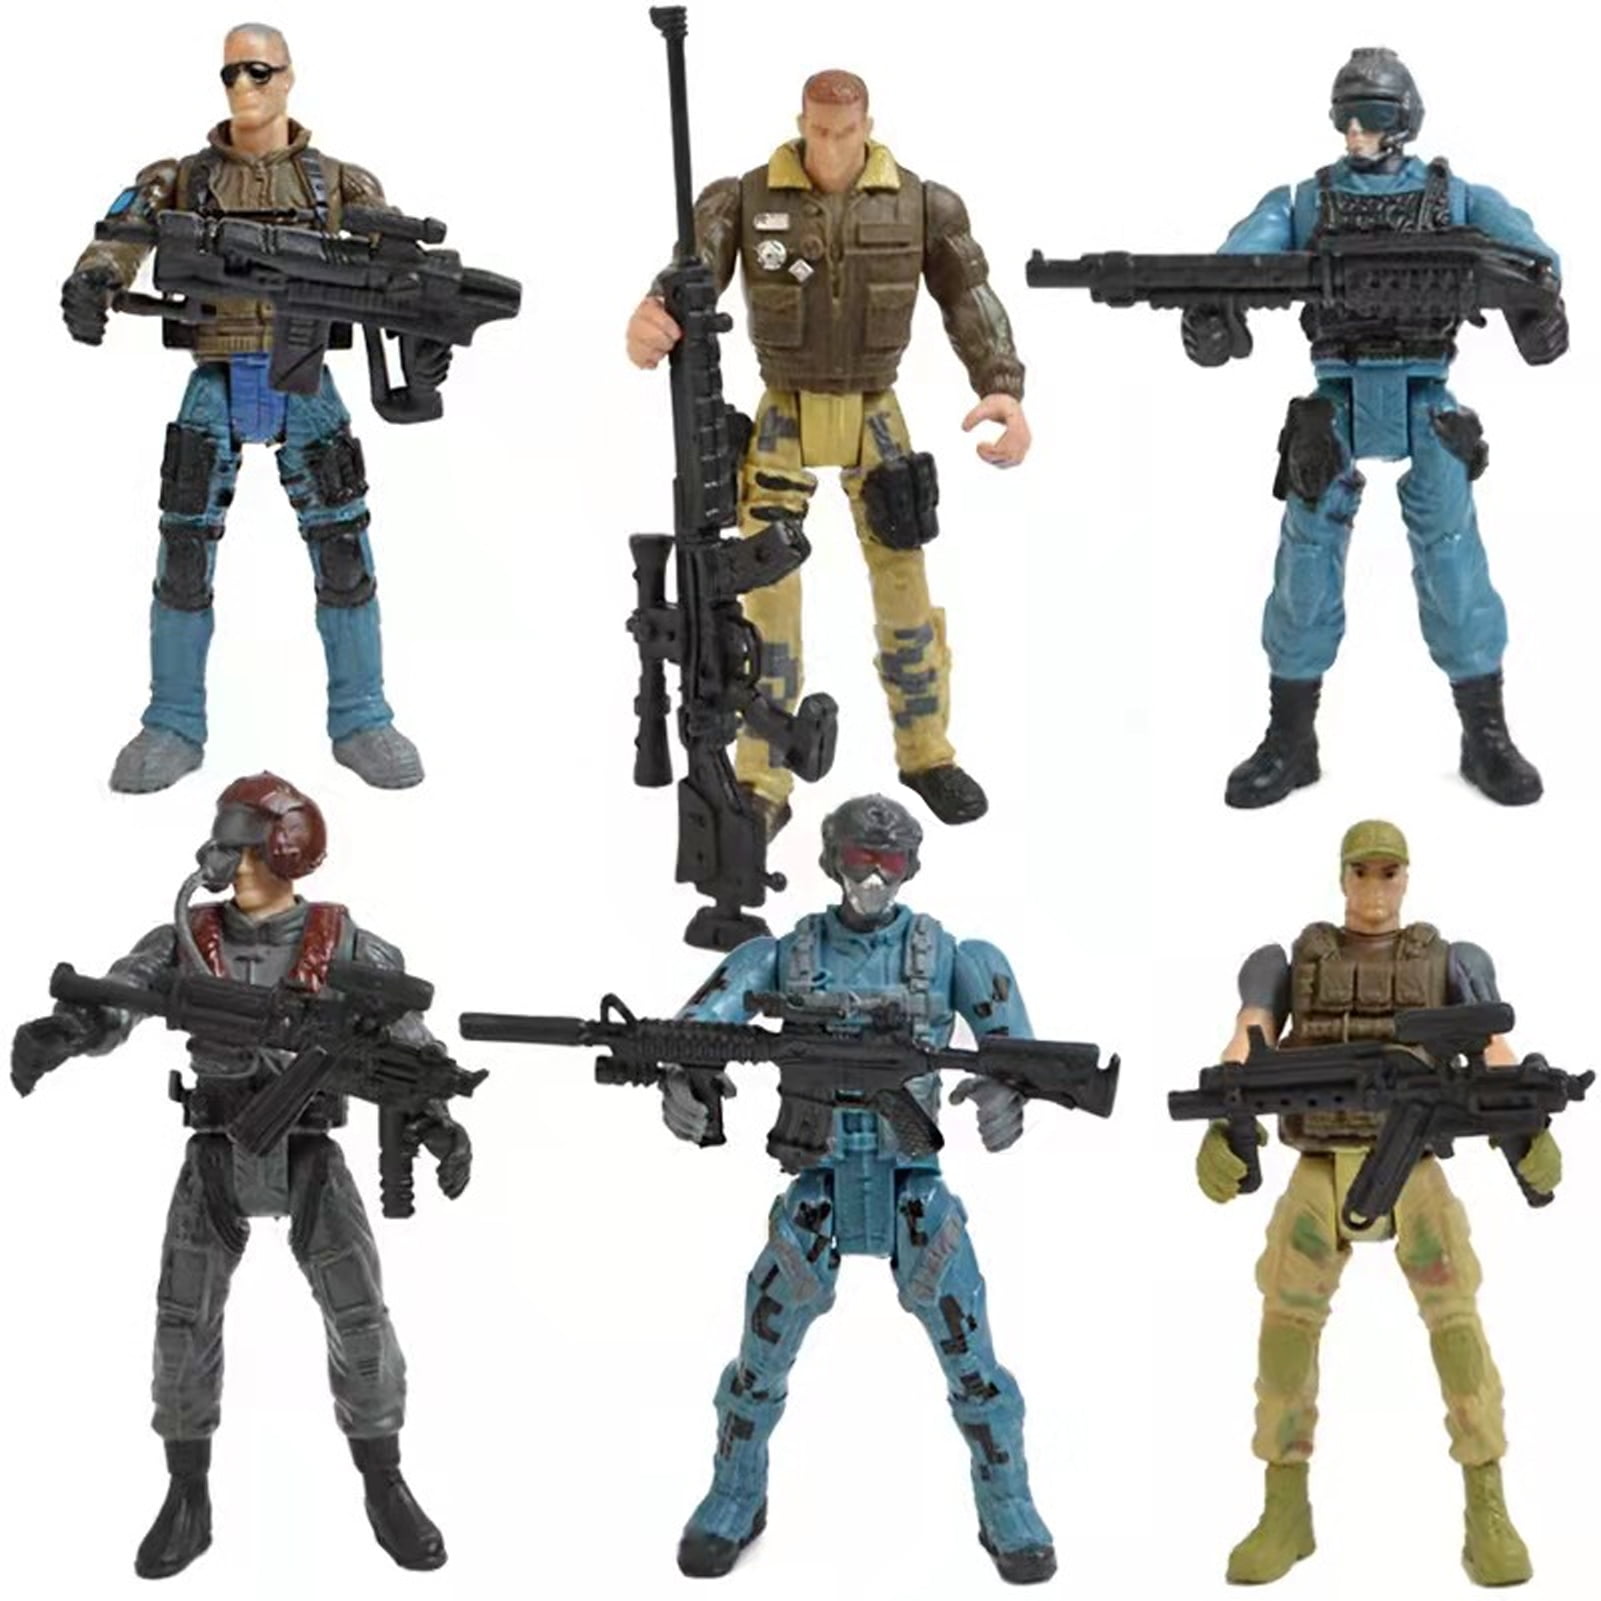 Lot of 8 Random Selected C.O.R.P Military Lanard Action Figure With 20 Weapons 